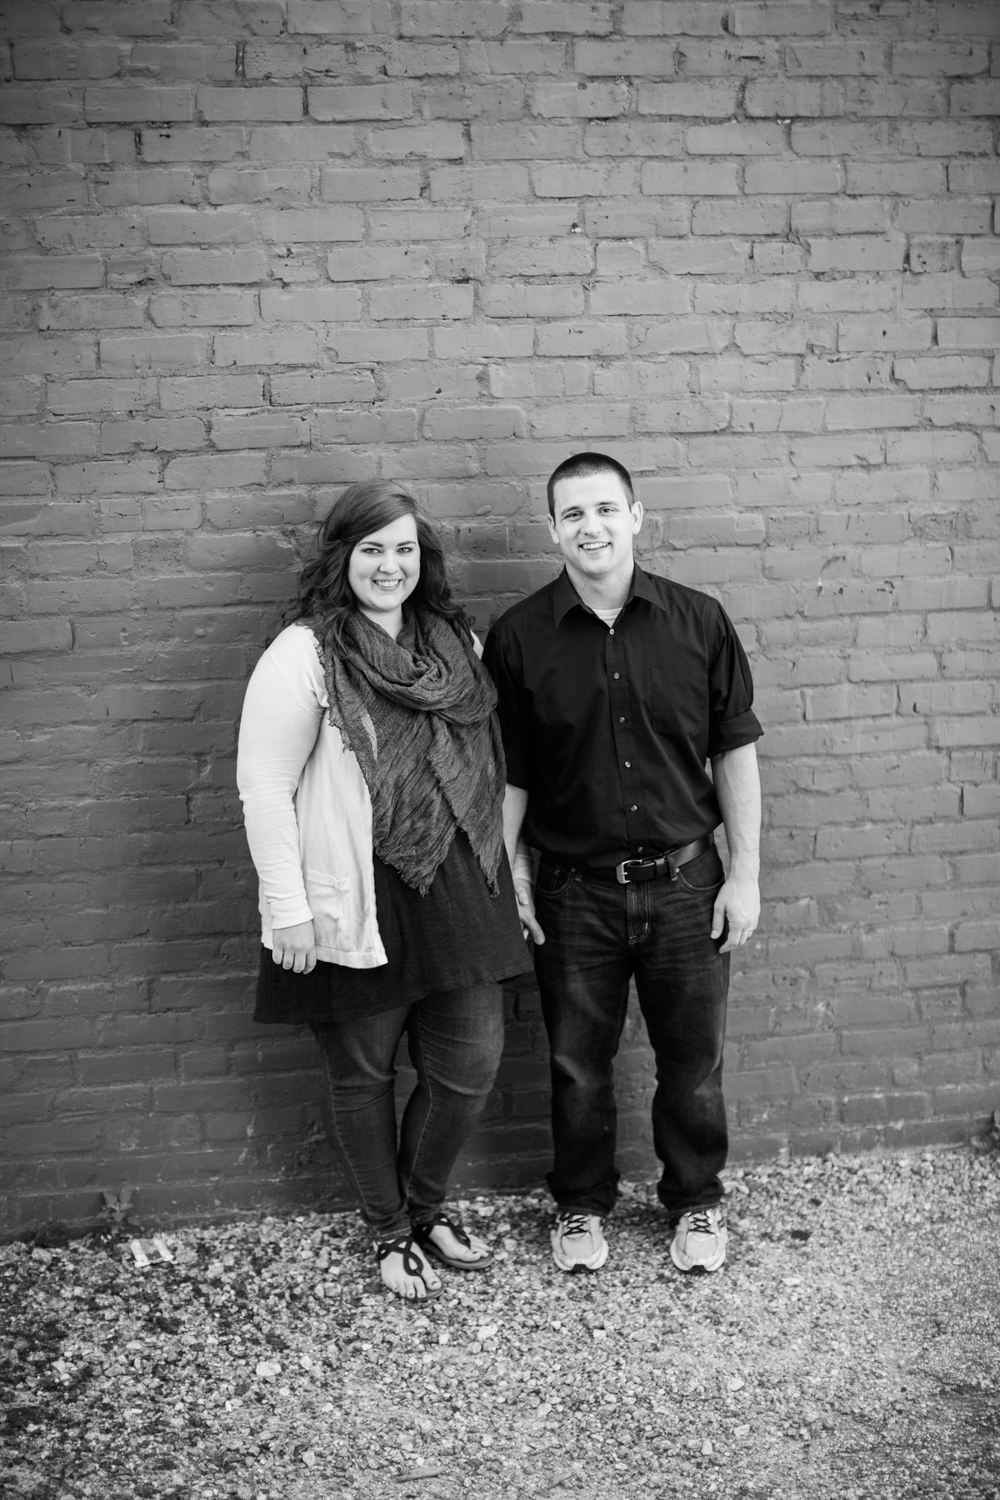 Black and white photo of Caitlin and Mike standing in front of brick wall